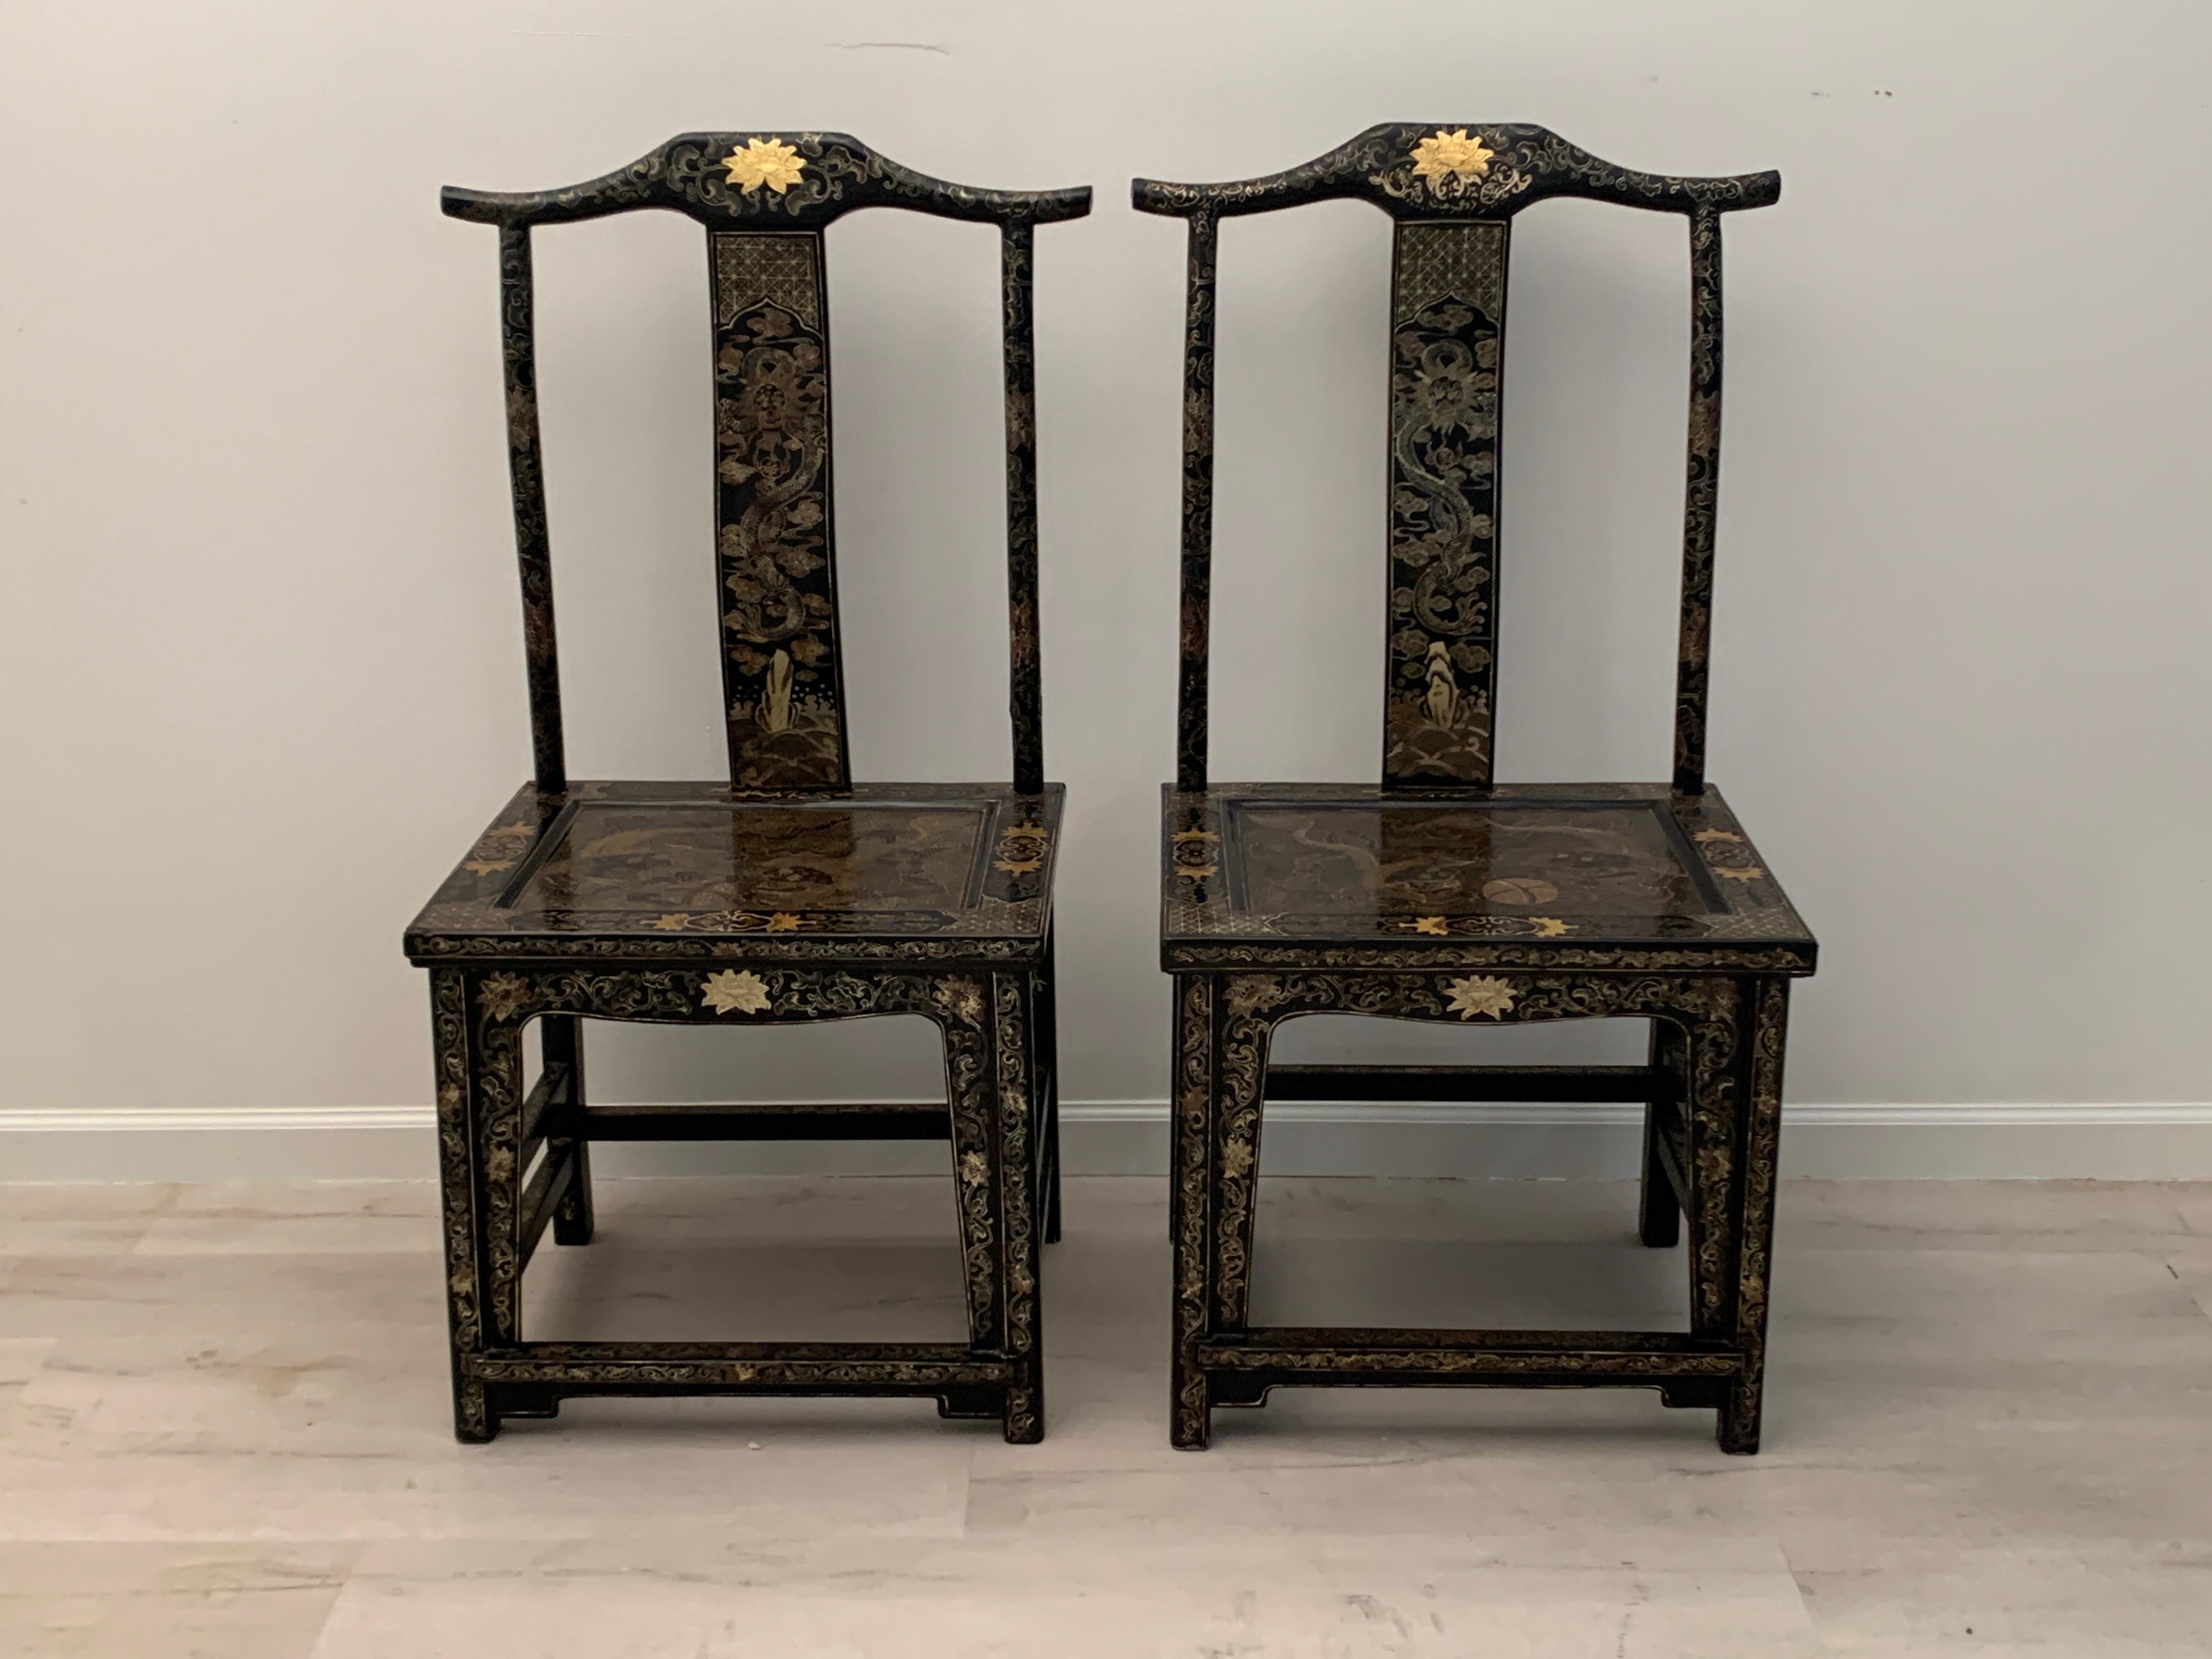 A stunning pair of Chinese black lacquer and gilt painted official's hat side chairs, made for the export market, mid 20th century, China.

The pair of side chairs of yoke back form, and decorated with polychrome and gilt painted designs on a